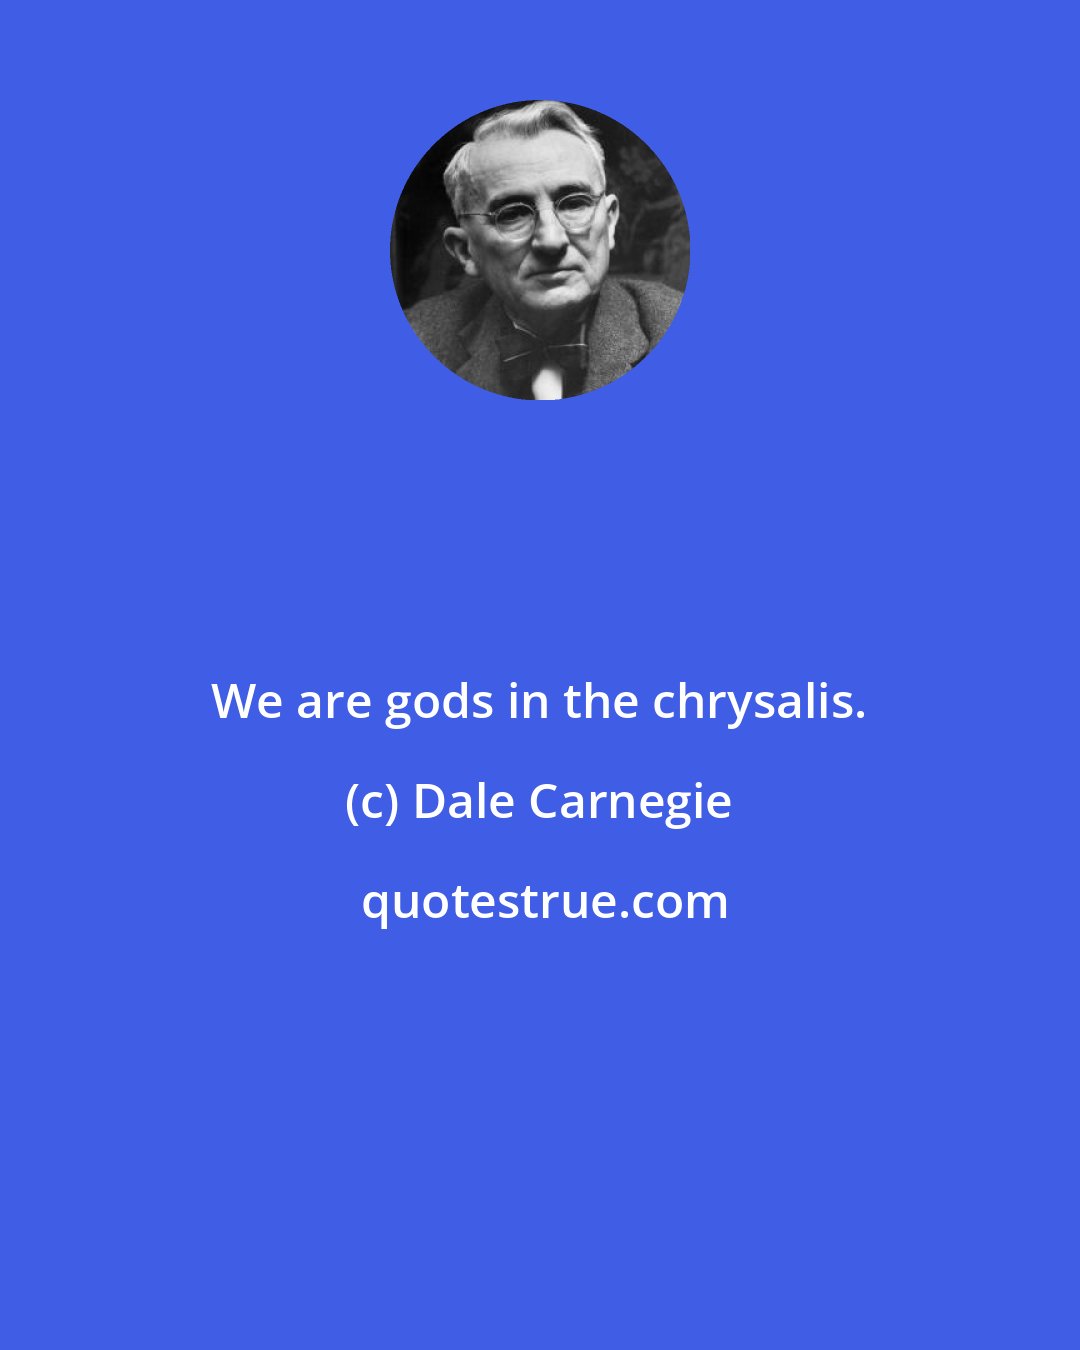 Dale Carnegie: We are gods in the chrysalis.